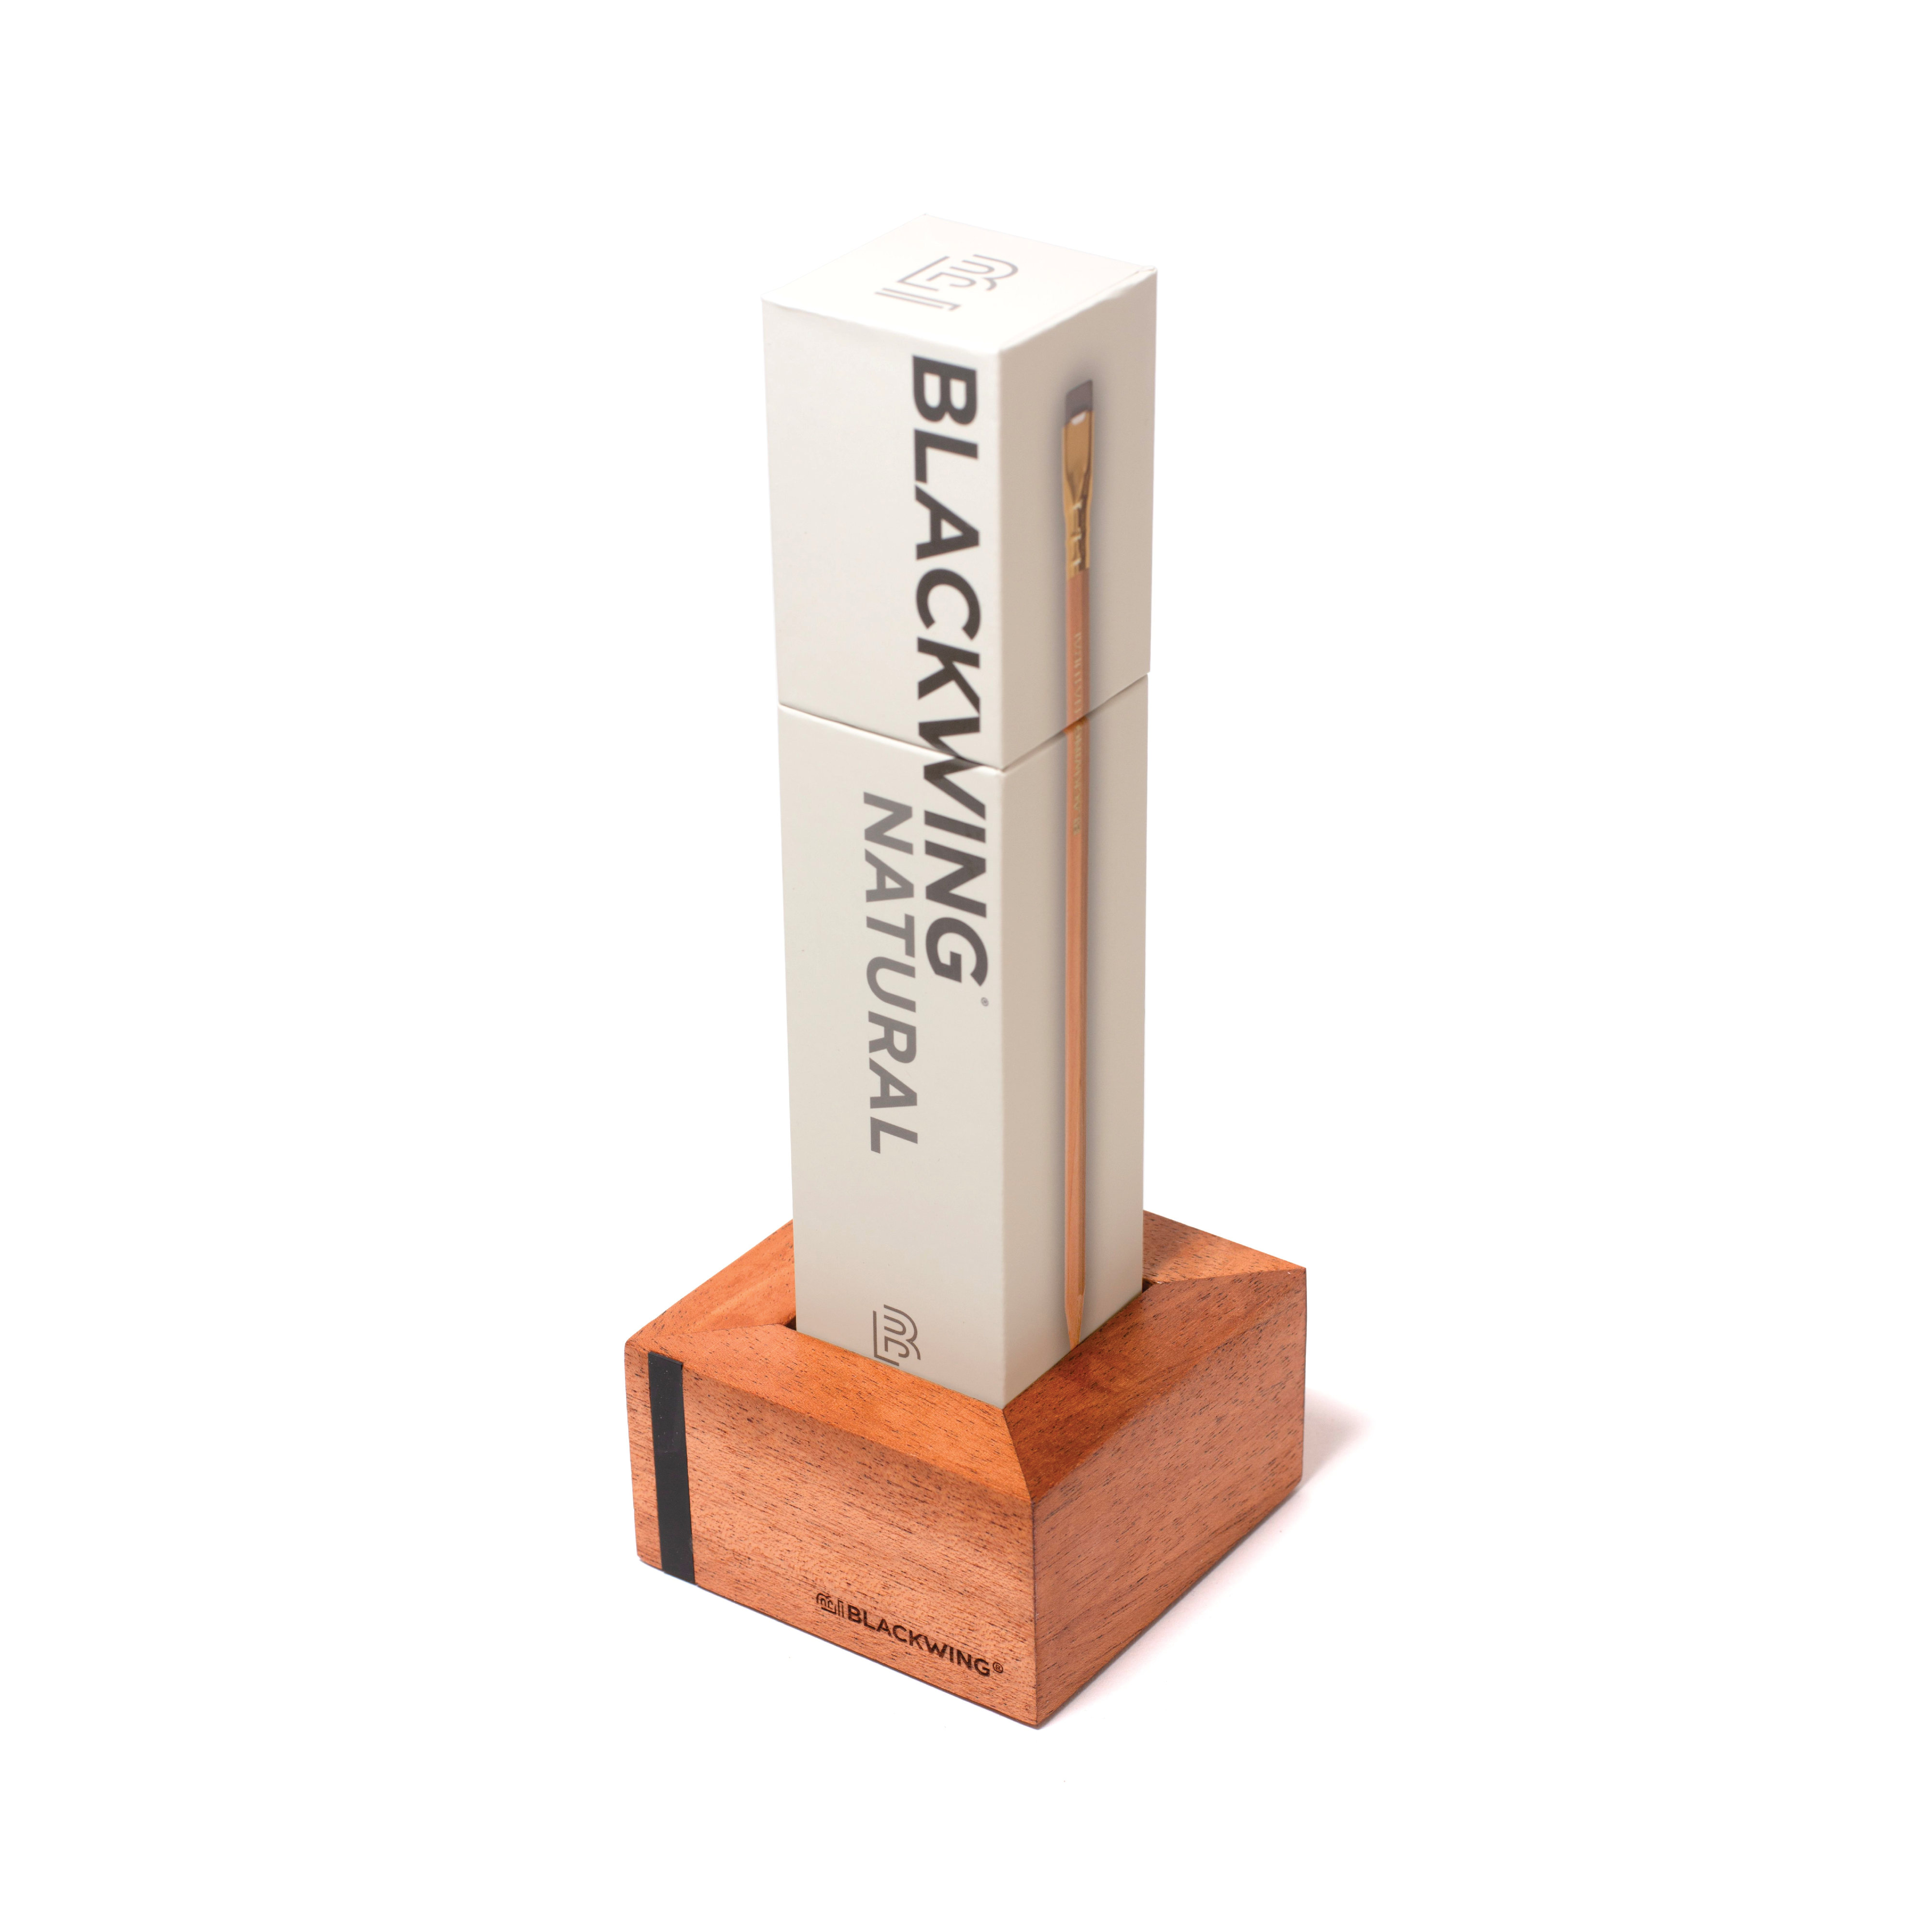 A wooden pencil box with the word Blackwing Upright Box Display displayed on it.